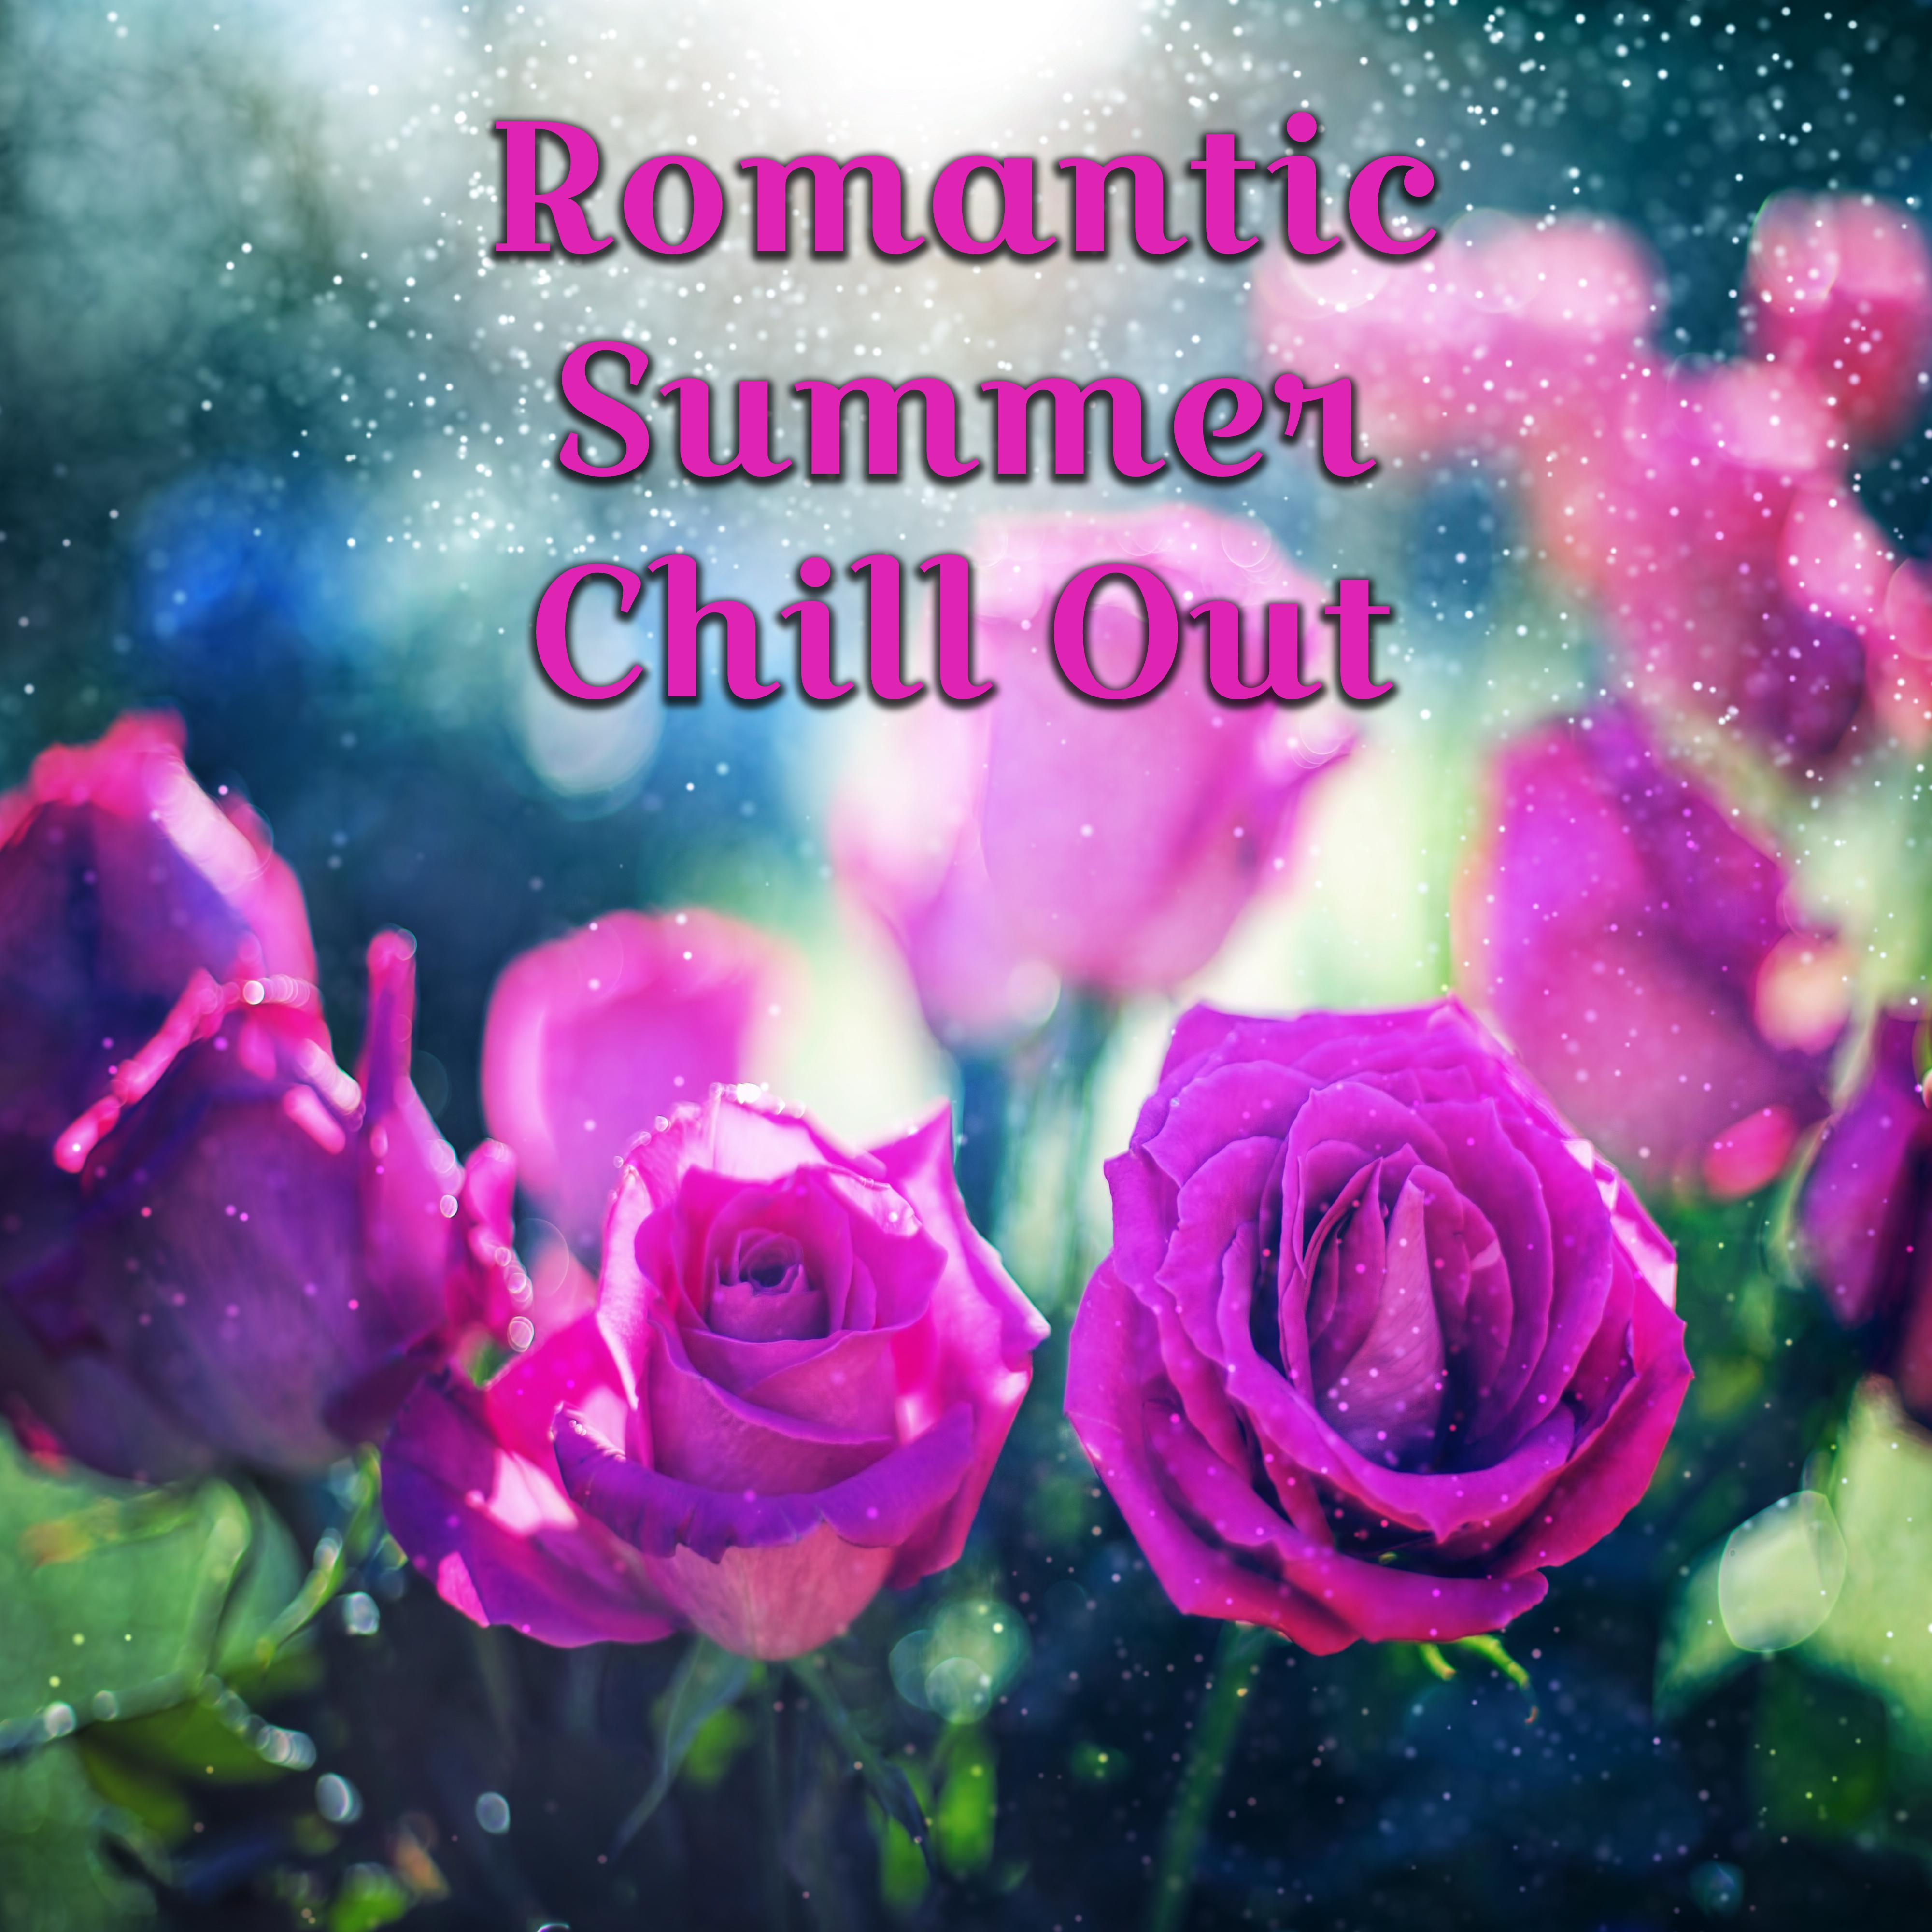 Romantic Summer Chill Out – **** Chill Out Vibes, Holiday Love, Romantic Summer Sounds